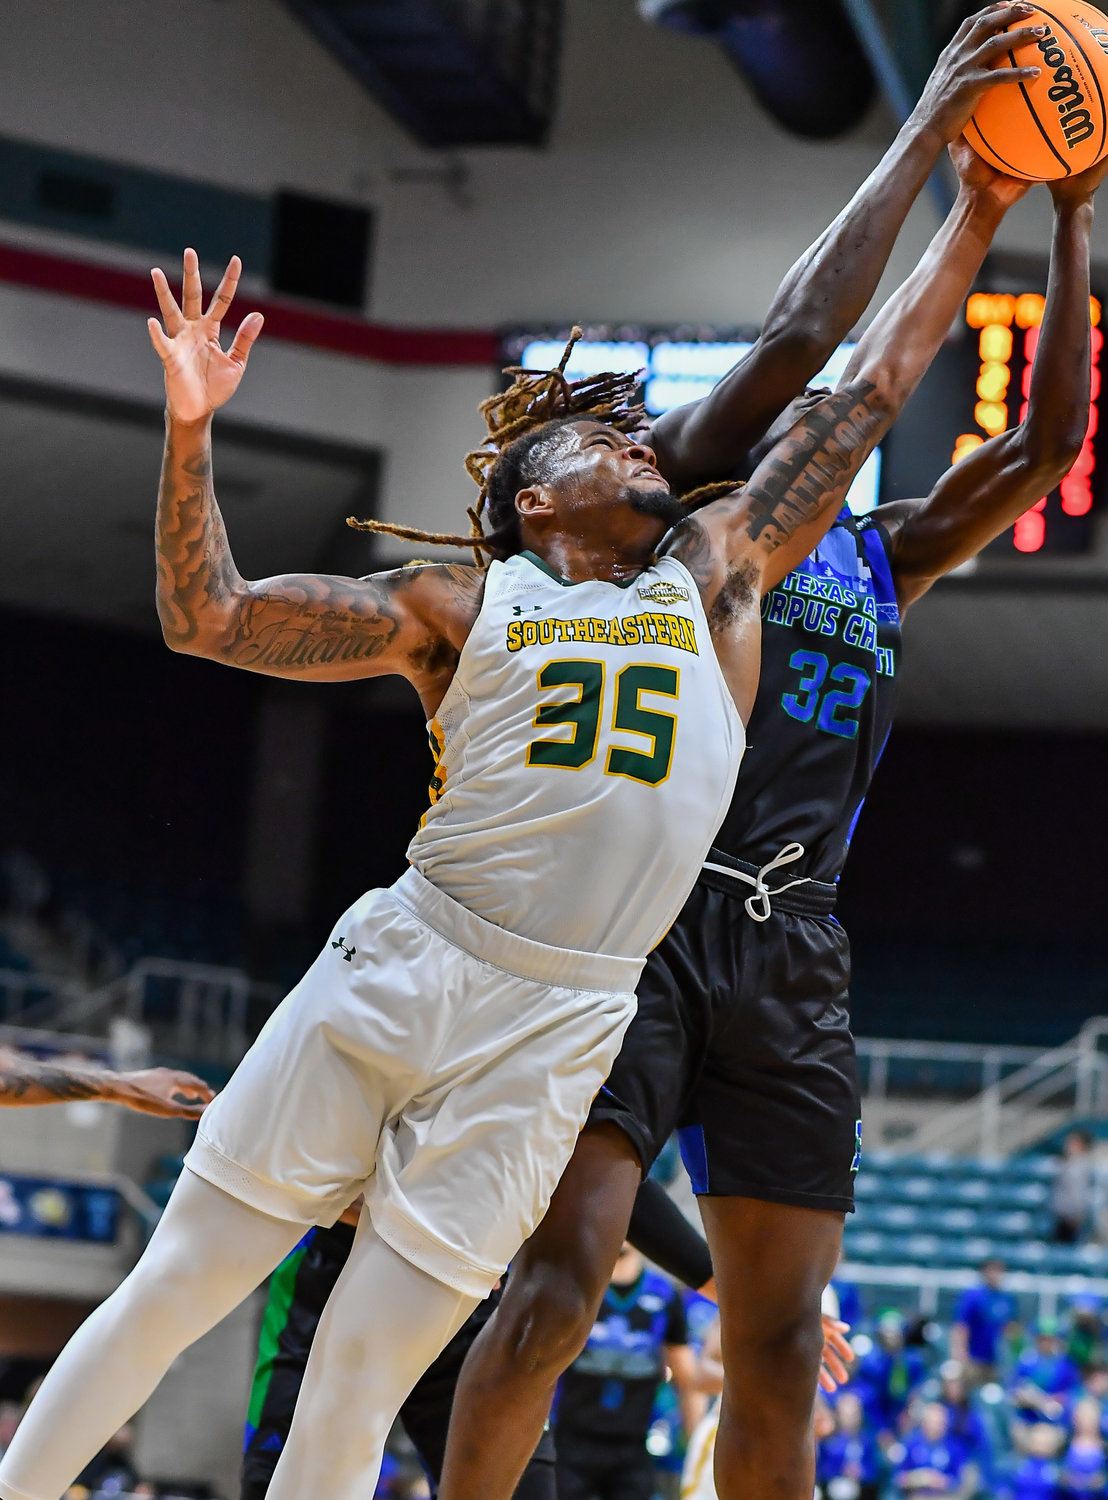 March 12,, 2022:  Southeastern Louisianas Gus Okafor #35 and A&M-Corpus Christis Stephen Faramade #32 battle for the rebound during the Southland Conference Basketball Championship game between A&M Corpus Christi vs Southeastern Louisiana. (Photo by Mark Goodman / Katy Times)